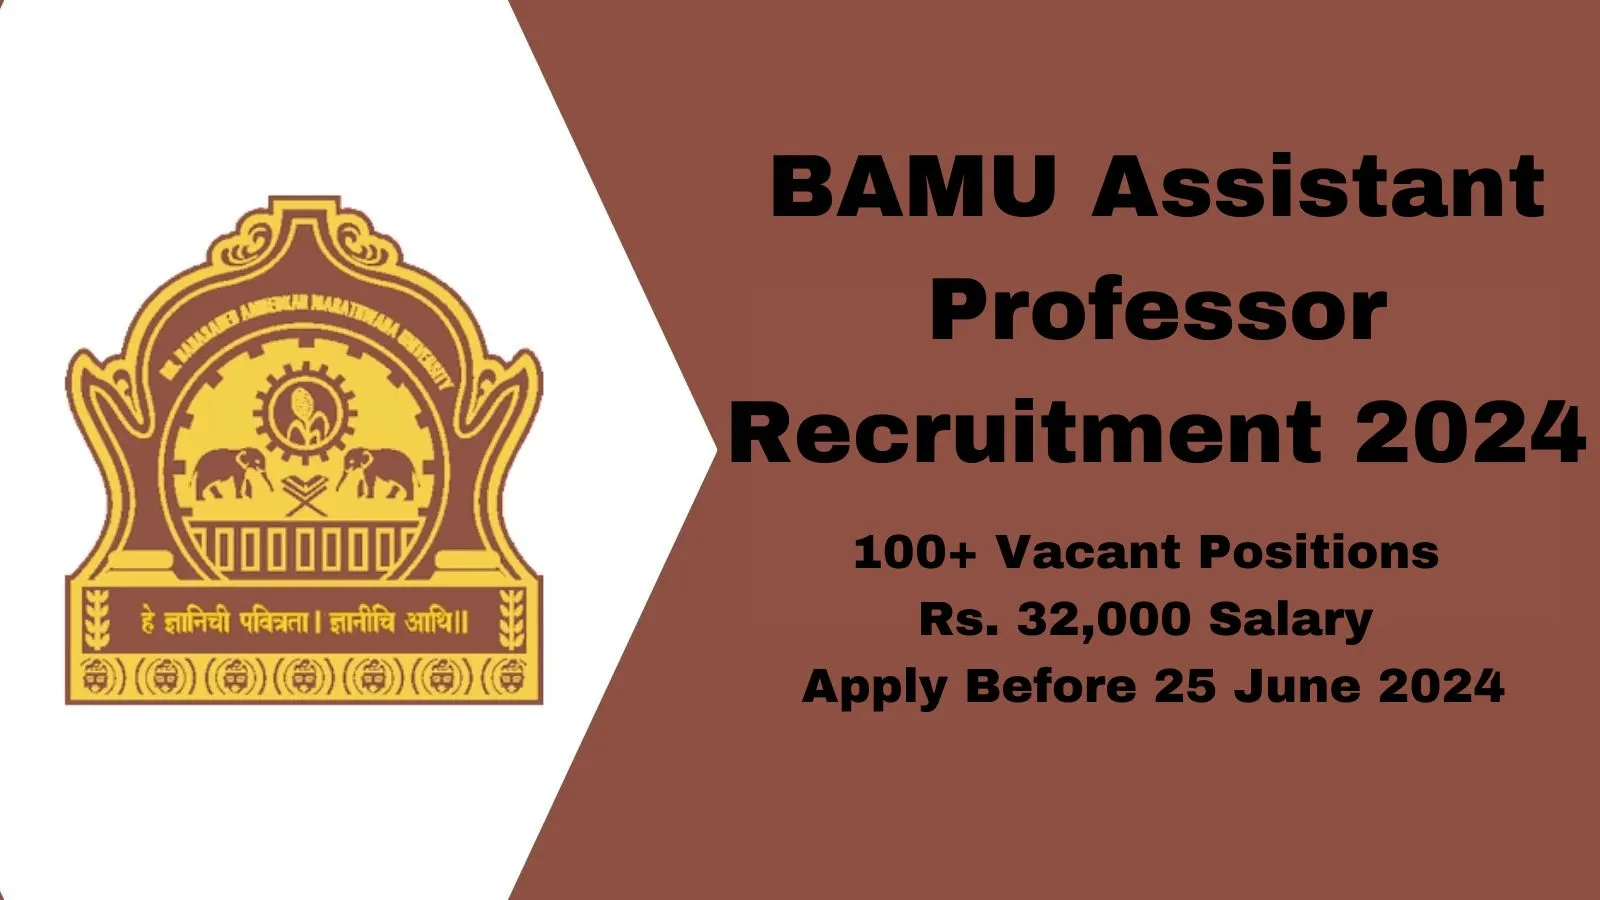 BAMU Assistant Professor Recruitment 2024, 100+ Vacant Positions, Salary, Apply Now, and More